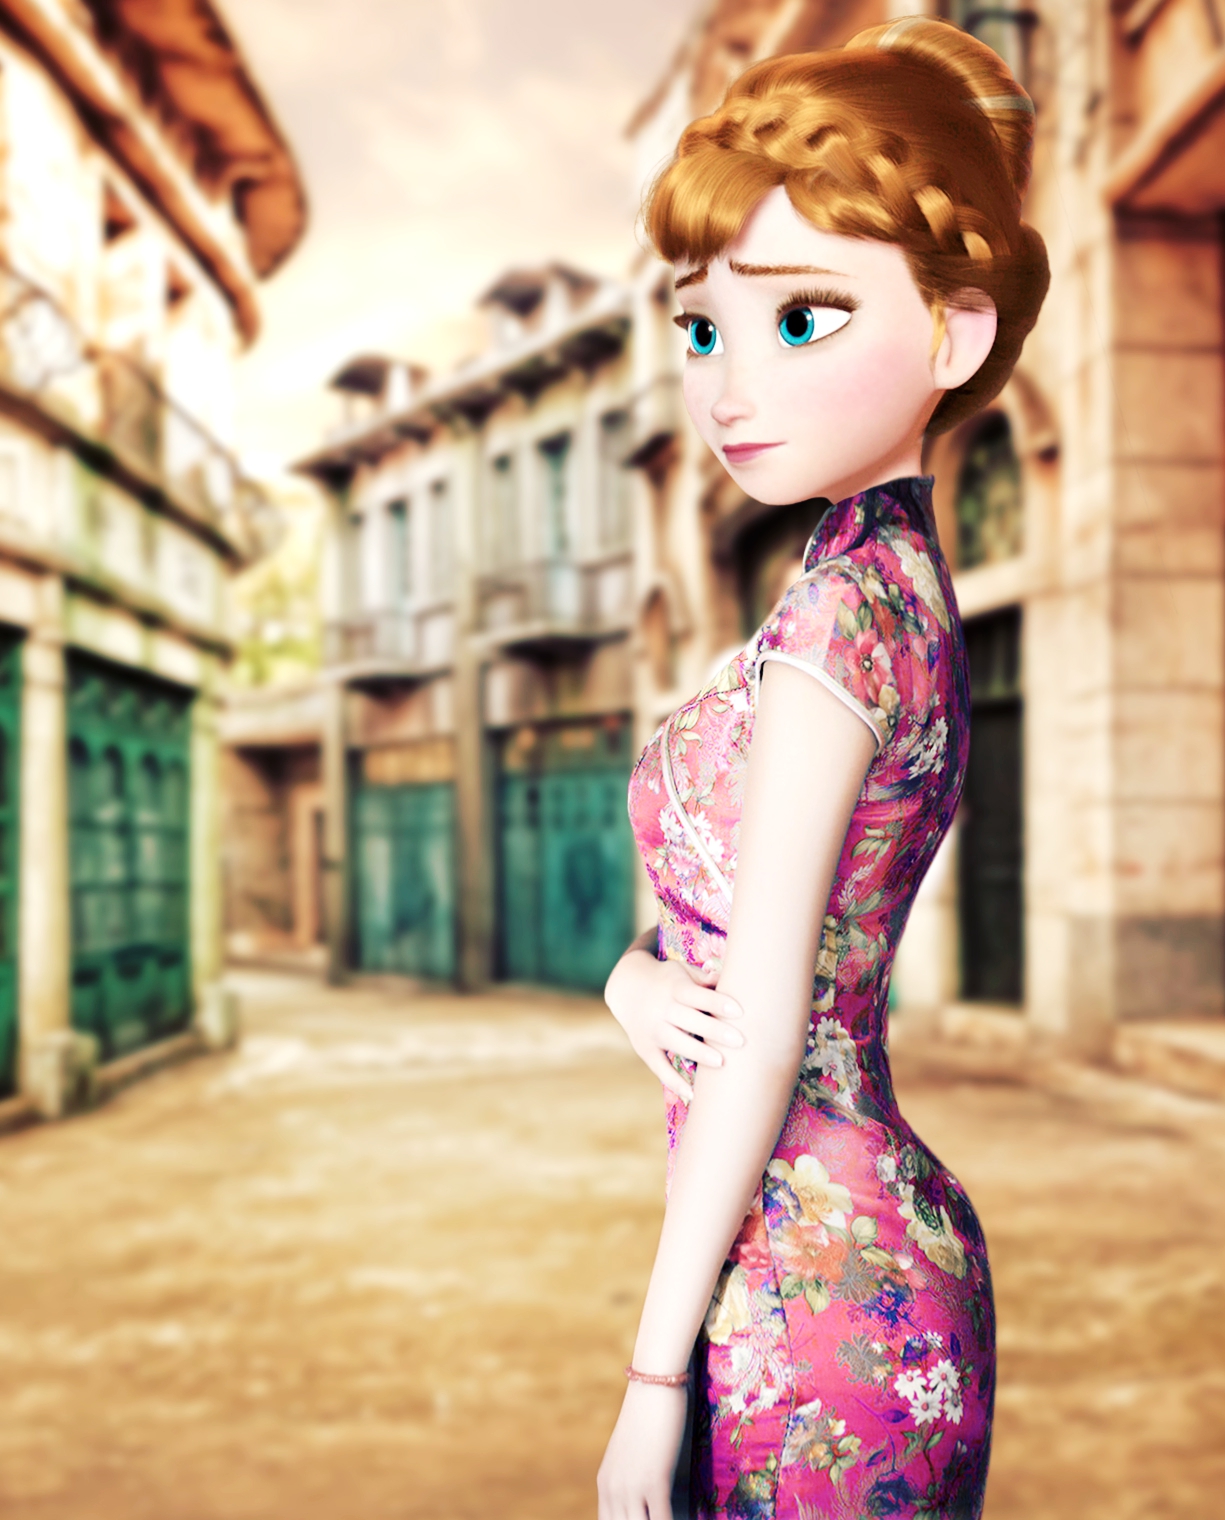 Heres What Its Like If Frozen Had Been Set In China